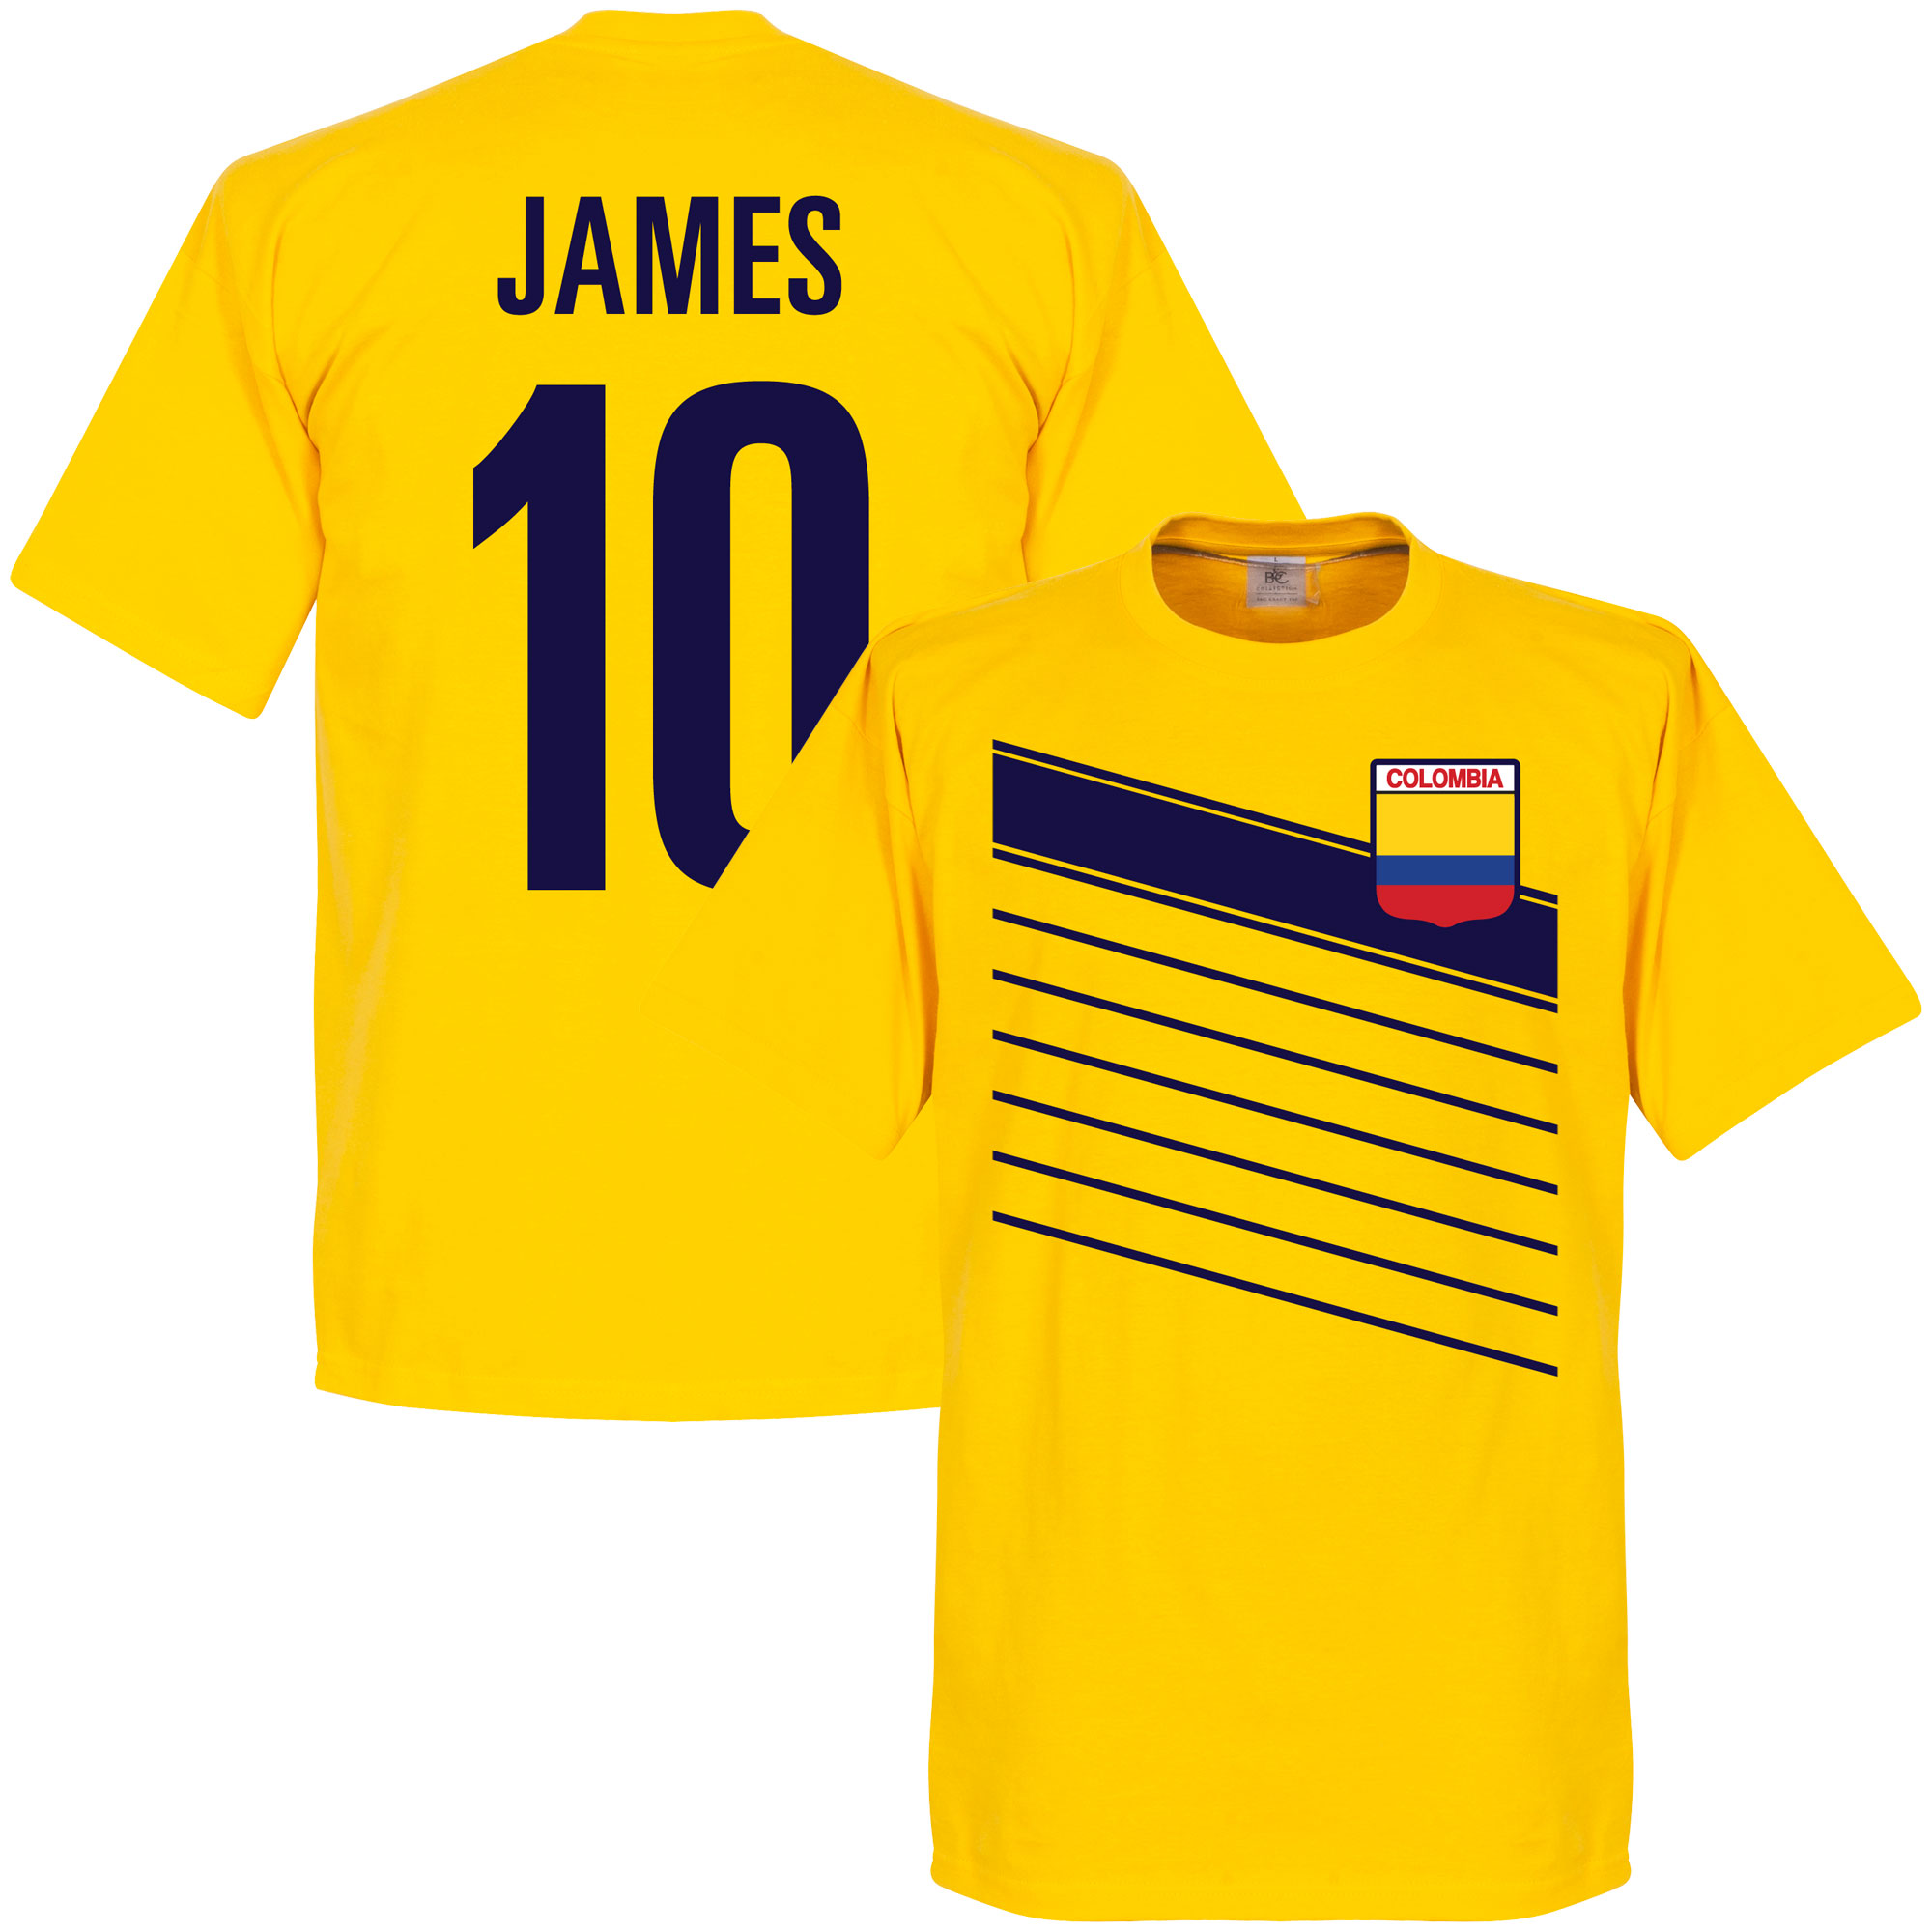 Colombia James 10 Team T-Shirt S